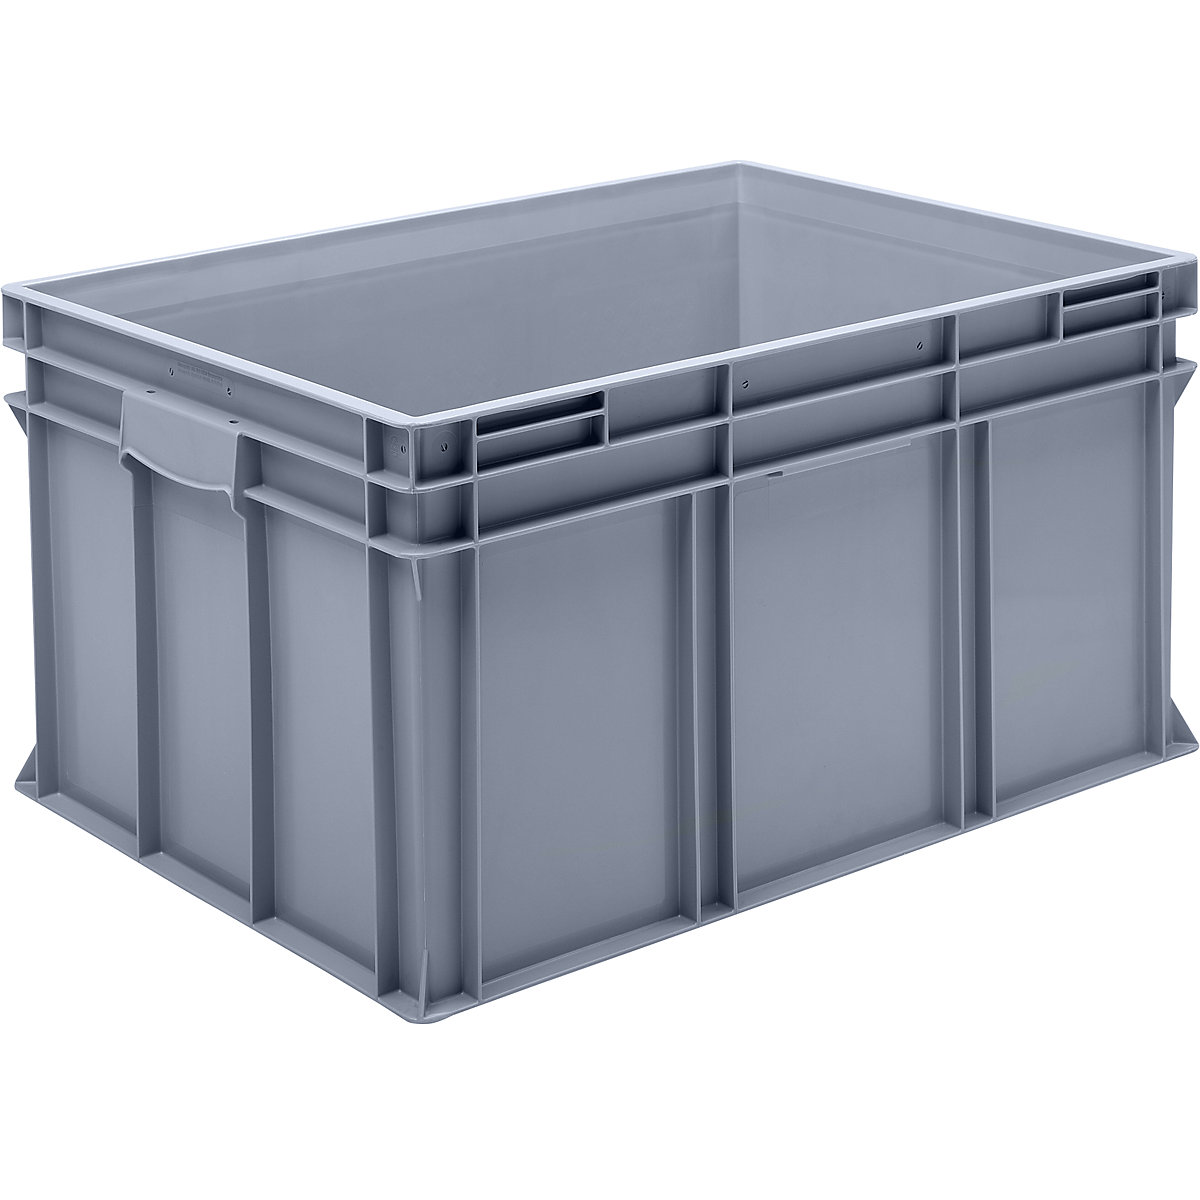 Euro stacking container made of polypropylene (PP), max. load 20 kg, silver grey, capacity 175 l, external height 425 mm, pack of 1